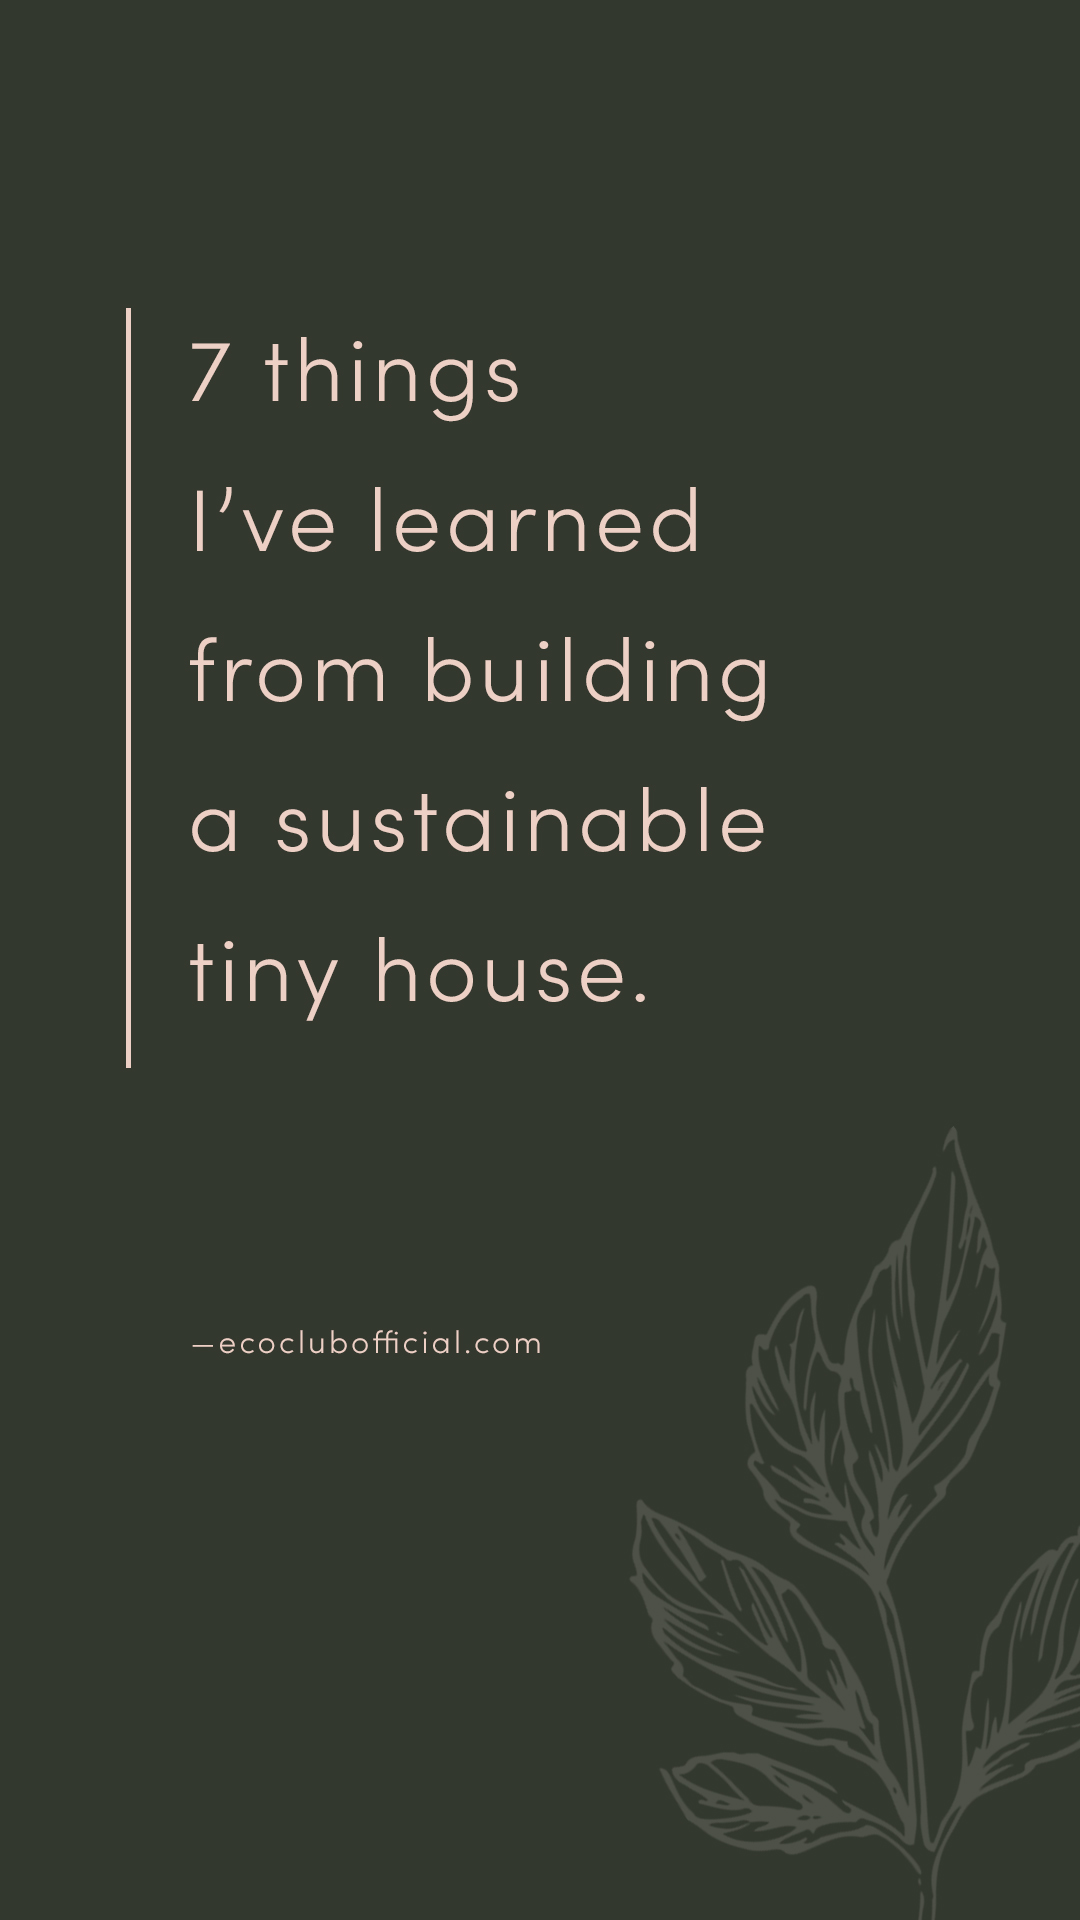 7 things I've learned from building a tiny house via eco club